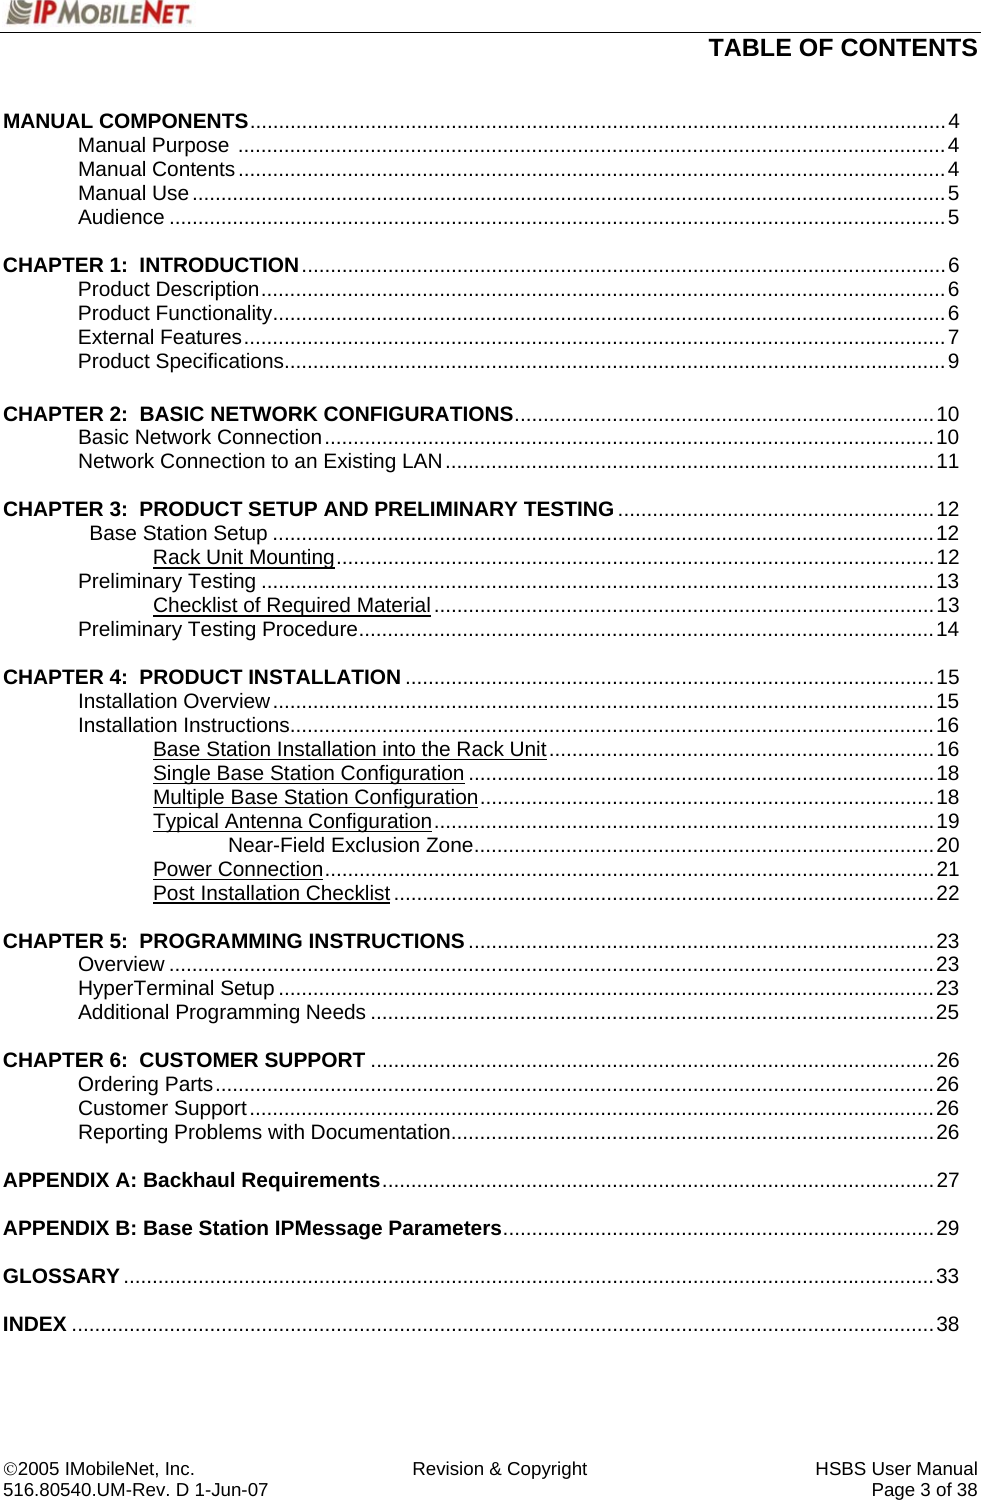  TABLE OF CONTENTS   ©2005 IMobileNet, Inc.  Revision &amp; Copyright  HSBS User Manual 516.80540.UM-Rev. D 1-Jun-07     Page 3 of 38  MANUAL COMPONENTS.........................................................................................................................4  Manual Purpose ...........................................................................................................................4  Manual Contents ...........................................................................................................................4  Manual Use...................................................................................................................................5  Audience .......................................................................................................................................5  CHAPTER 1:  INTRODUCTION................................................................................................................6  Product Description.......................................................................................................................6  Product Functionality.....................................................................................................................6  External Features..........................................................................................................................7  Product Specifications...................................................................................................................9    CHAPTER 2:  BASIC NETWORK CONFIGURATIONS.........................................................................10  Basic Network Connection..........................................................................................................10  Network Connection to an Existing LAN.....................................................................................11  CHAPTER 3:  PRODUCT SETUP AND PRELIMINARY TESTING.......................................................12    Base Station Setup ...................................................................................................................12   Rack Unit Mounting........................................................................................................12  Preliminary Testing .....................................................................................................................13     Checklist of Required Material.......................................................................................13  Preliminary Testing Procedure....................................................................................................14  CHAPTER 4:  PRODUCT INSTALLATION ............................................................................................15  Installation Overview...................................................................................................................15  Installation Instructions................................................................................................................16     Base Station Installation into the Rack Unit...................................................................16     Single Base Station Configuration .................................................................................18     Multiple Base Station Configuration...............................................................................18   Typical Antenna Configuration.......................................................................................19    Near-Field Exclusion Zone................................................................................20   Power Connection..........................................................................................................21   Post Installation Checklist..............................................................................................22  CHAPTER 5:  PROGRAMMING INSTRUCTIONS.................................................................................23  Overview .....................................................................................................................................23  HyperTerminal Setup ..................................................................................................................23  Additional Programming Needs ..................................................................................................25   CHAPTER 6:  CUSTOMER SUPPORT ..................................................................................................26  Ordering Parts.............................................................................................................................26  Customer Support.......................................................................................................................26   Reporting Problems with Documentation....................................................................................26  APPENDIX A: Backhaul Requirements................................................................................................27  APPENDIX B: Base Station IPMessage Parameters...........................................................................29  GLOSSARY.............................................................................................................................................33  INDEX ......................................................................................................................................................38  